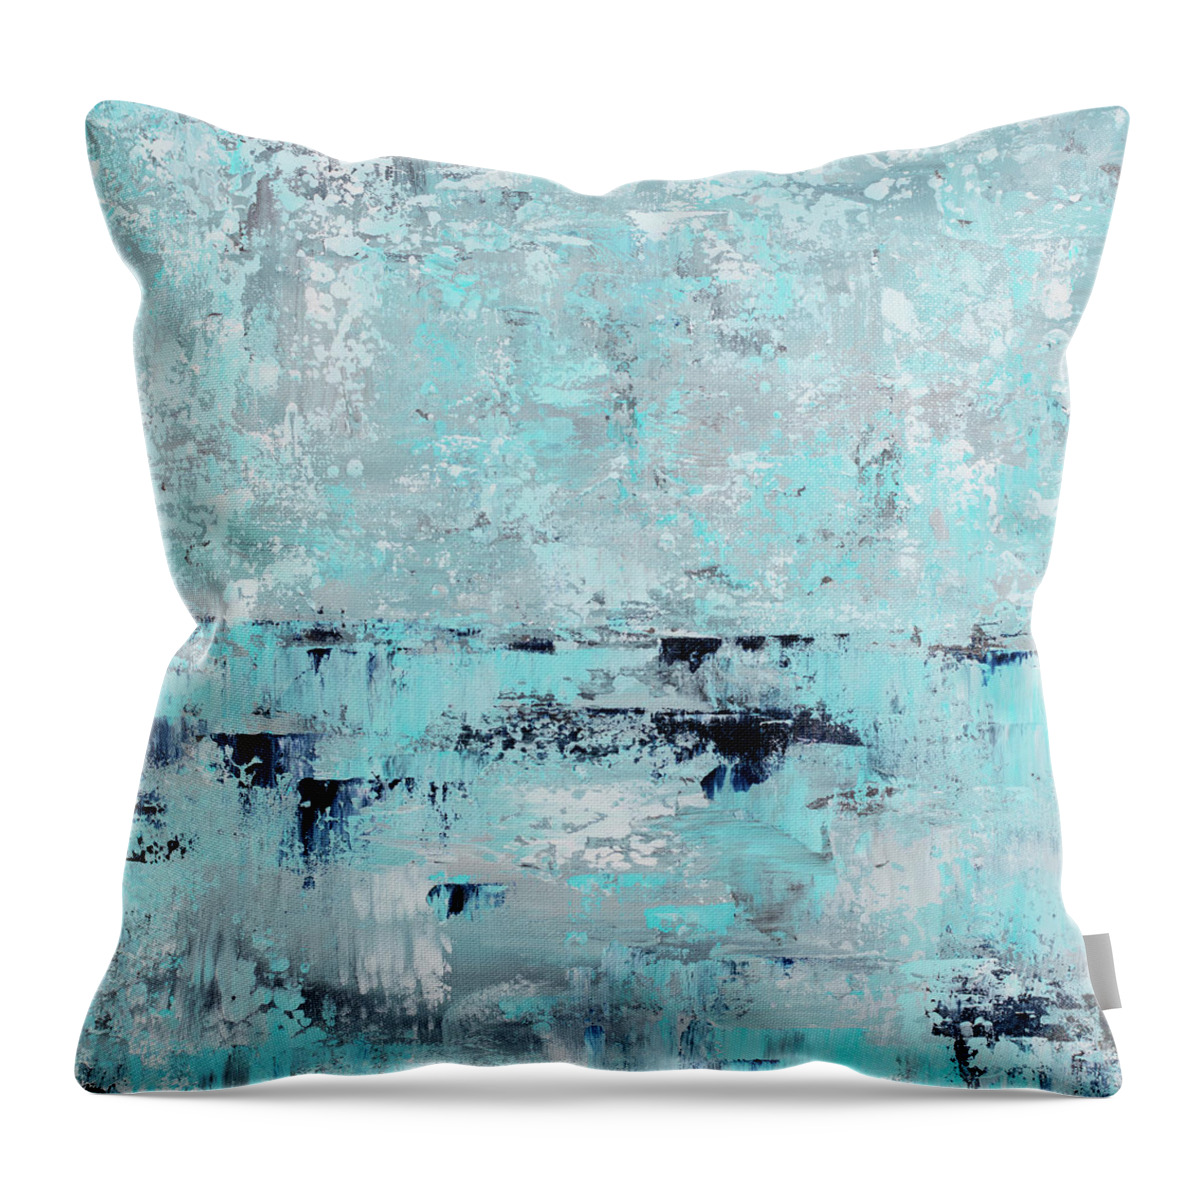 Abstract Throw Pillow featuring the painting Reflect by Tamara Nelson